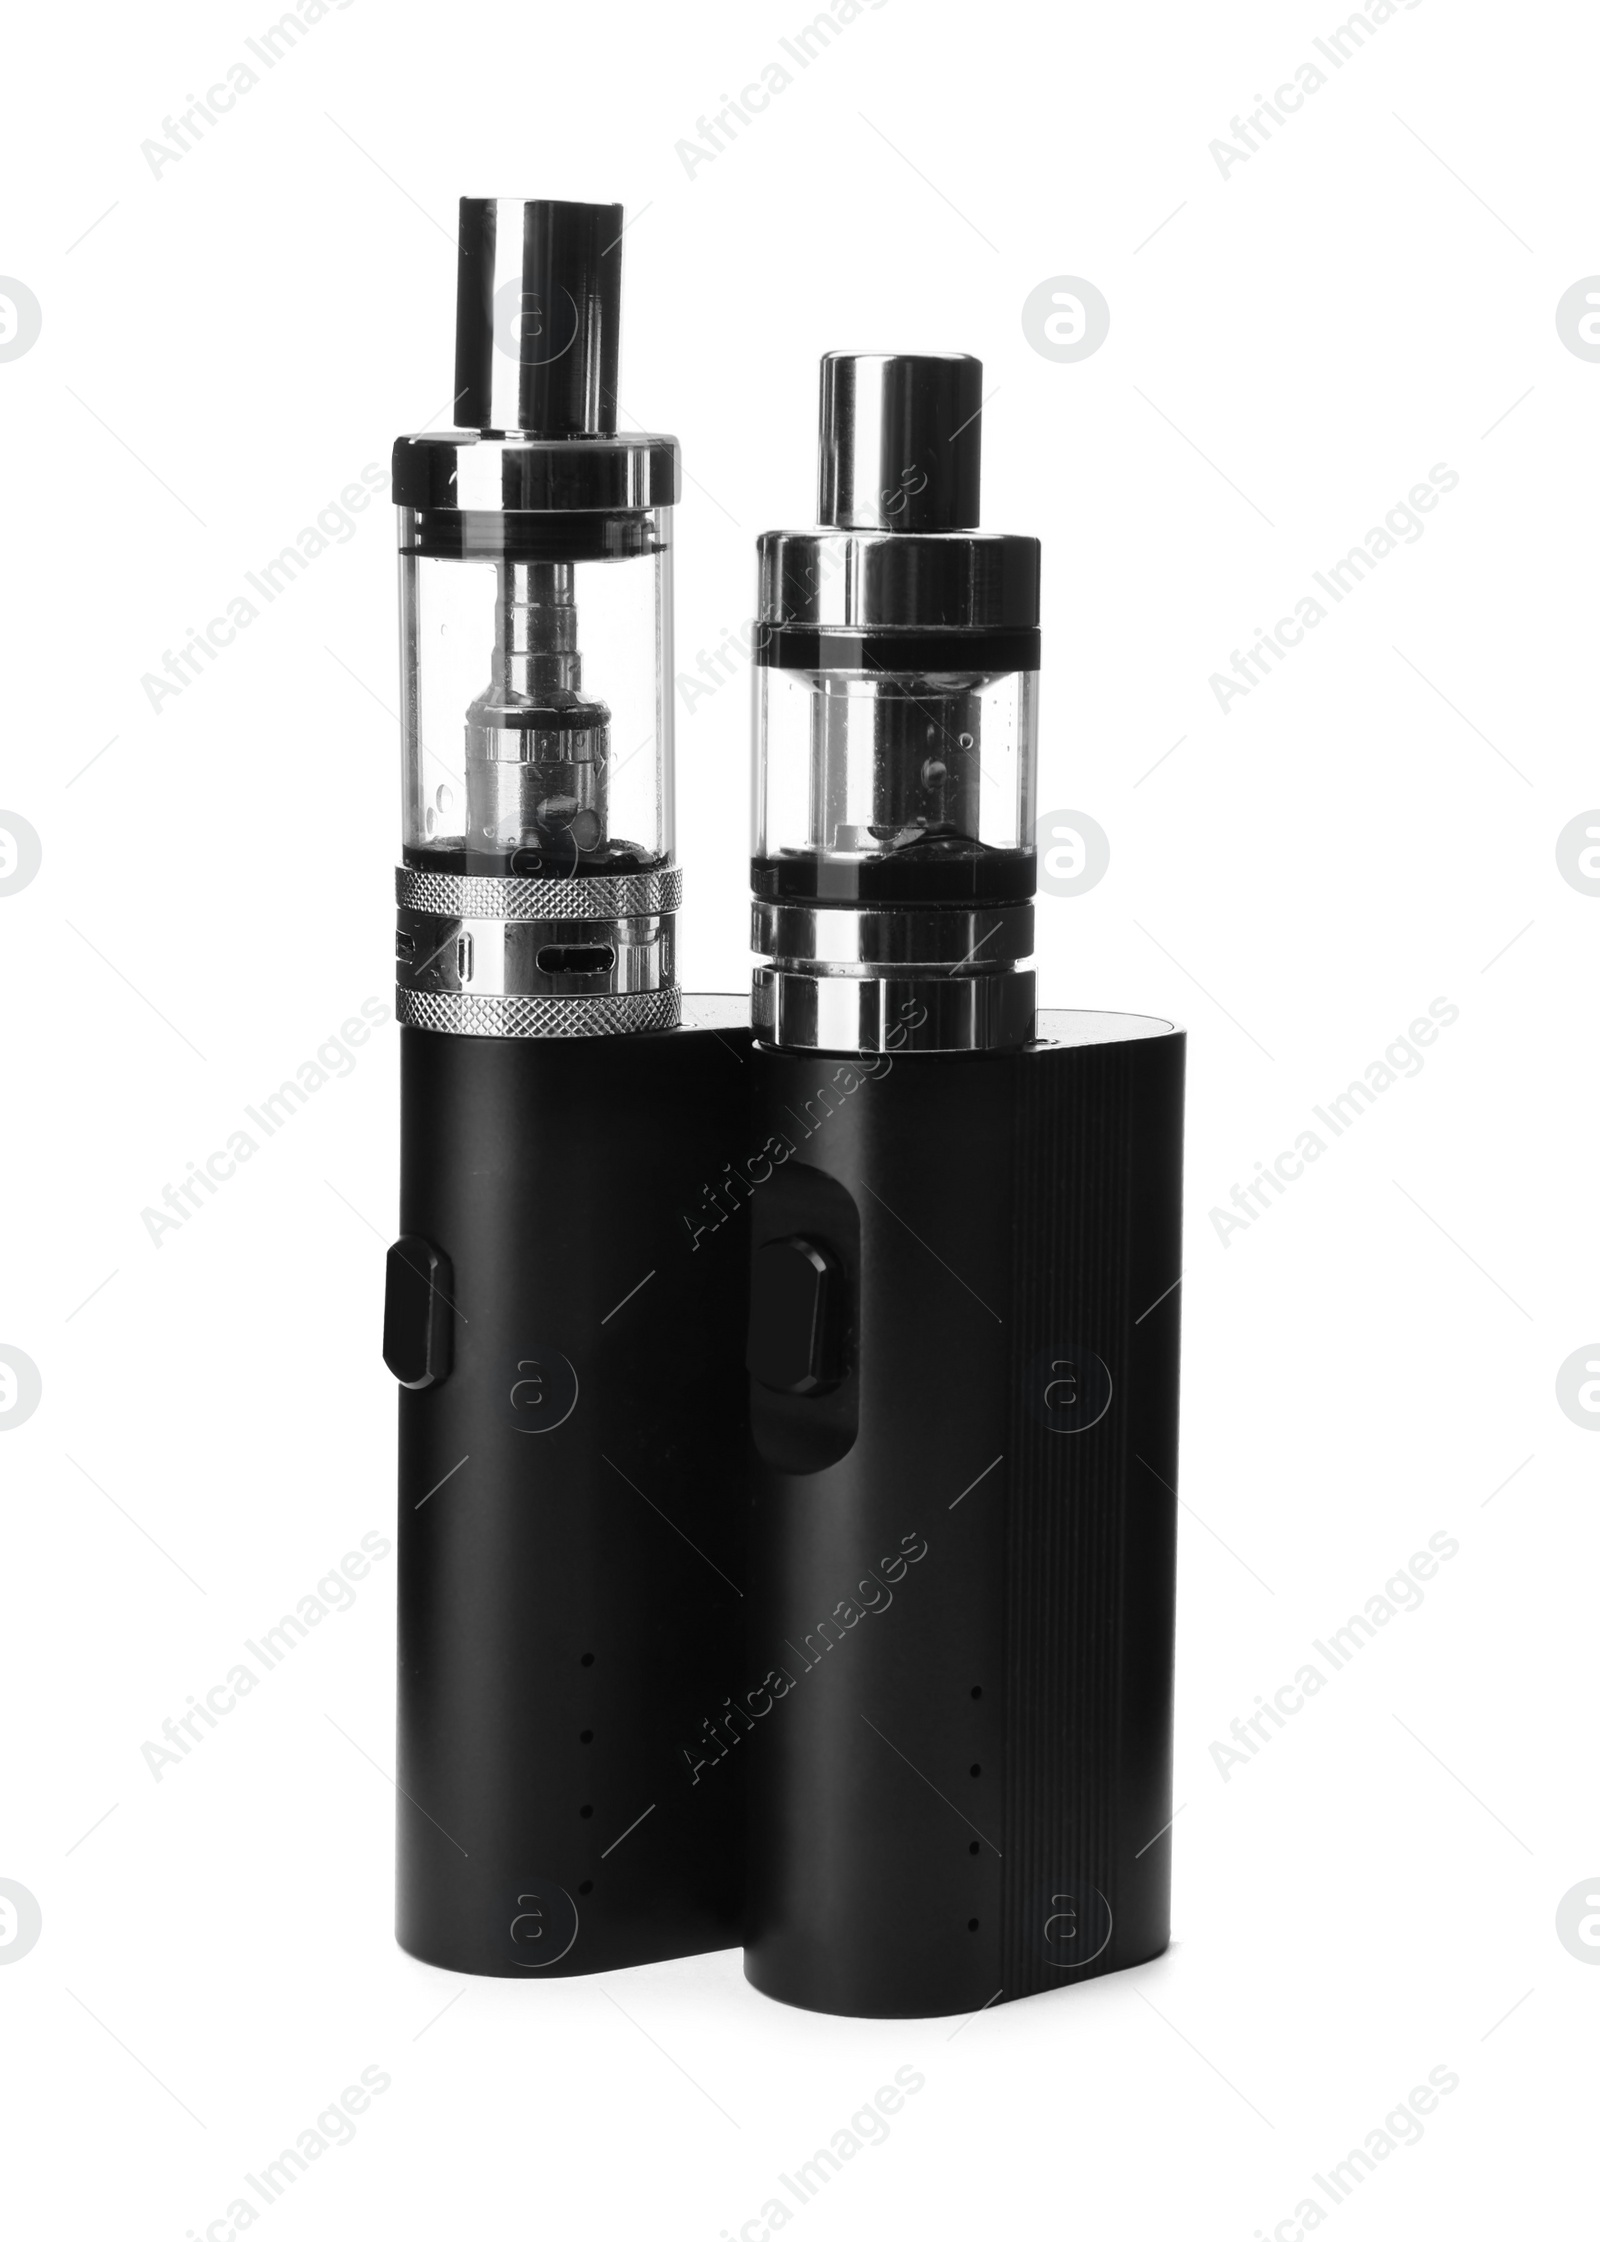 Photo of Two electronic smoking devices on white background